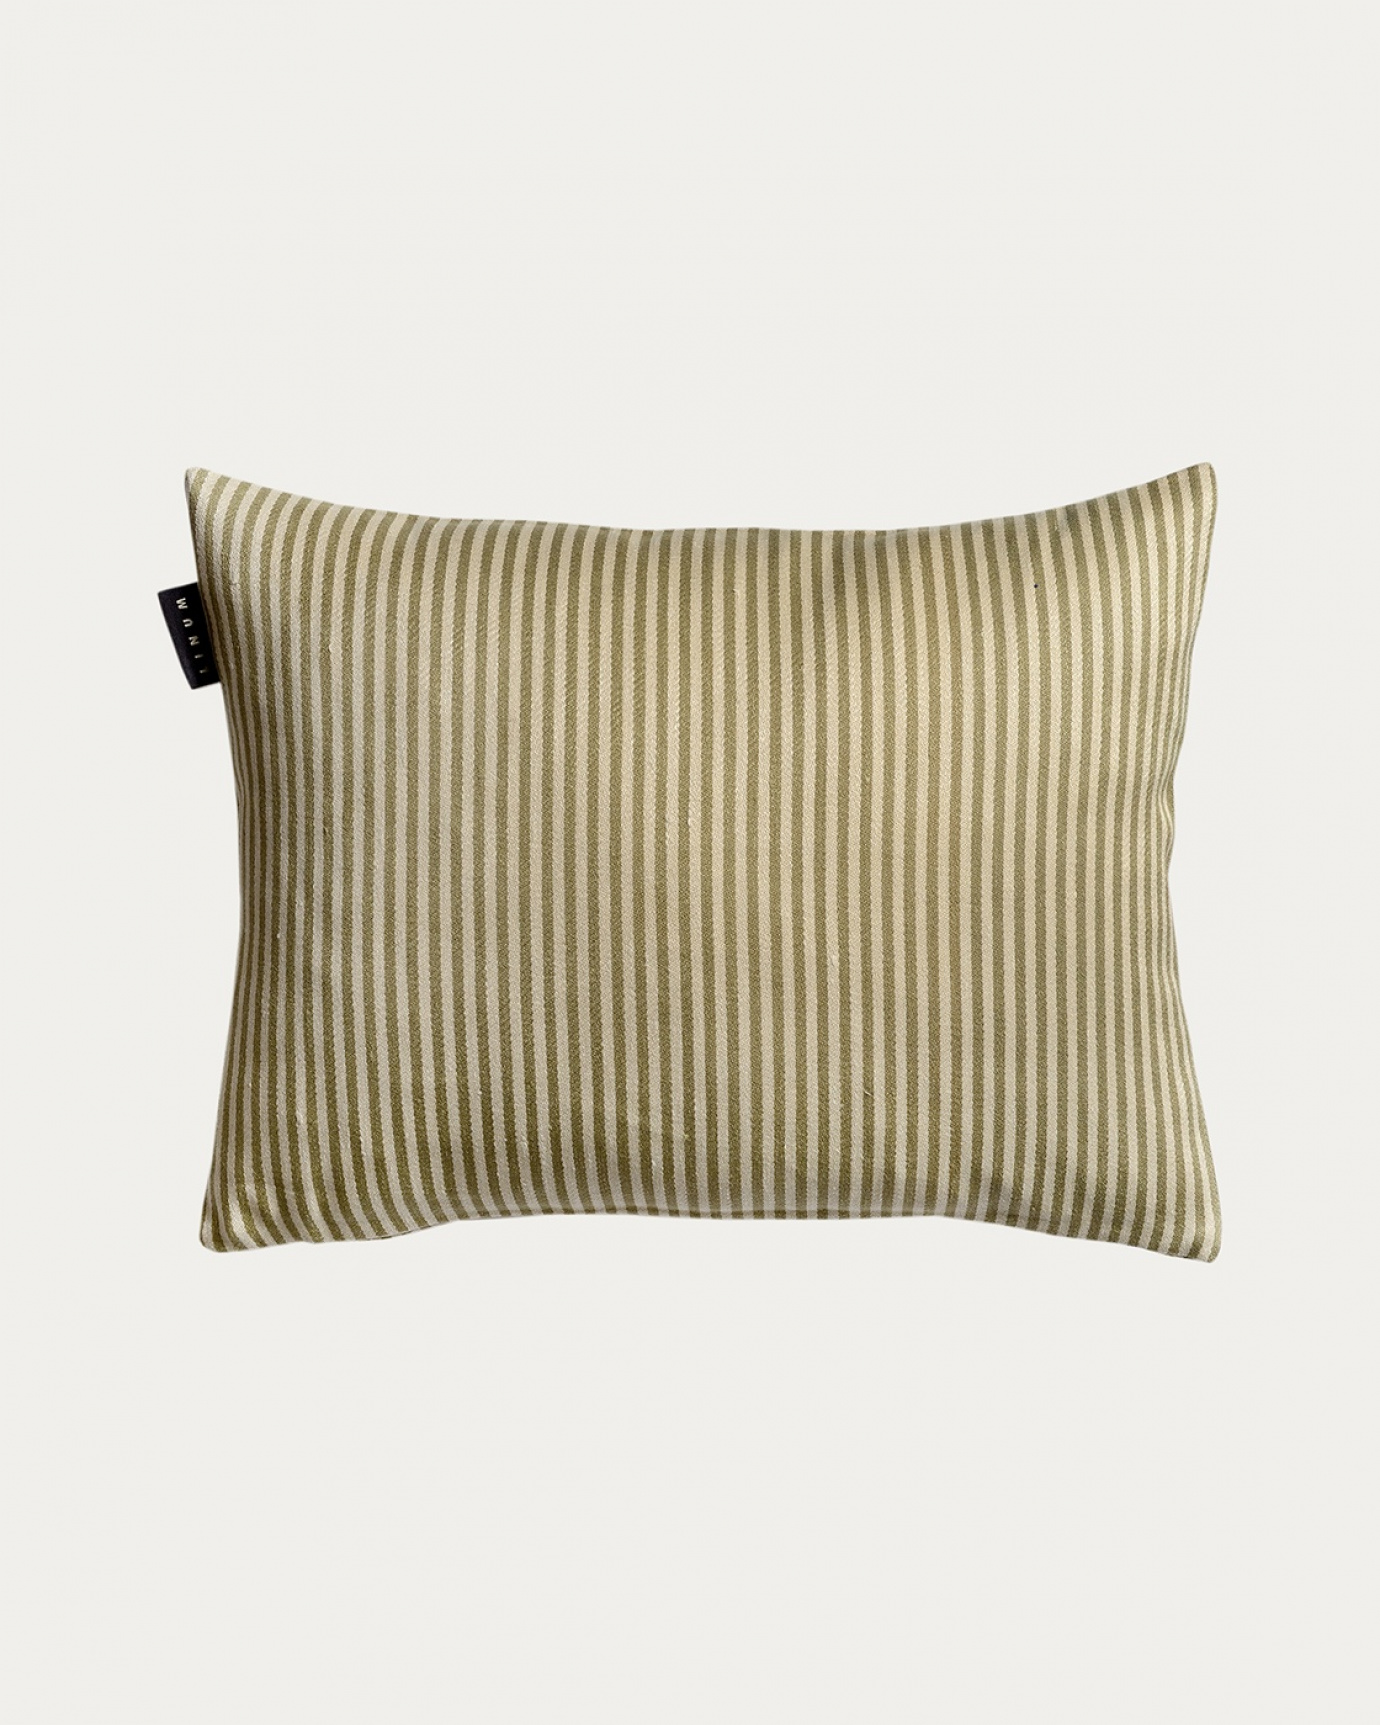 Product image soft grey green CALCIO cushion cover with thin stripes of 77% linen and 23% cotton from LINUM DESIGN. Size 35x50 cm.